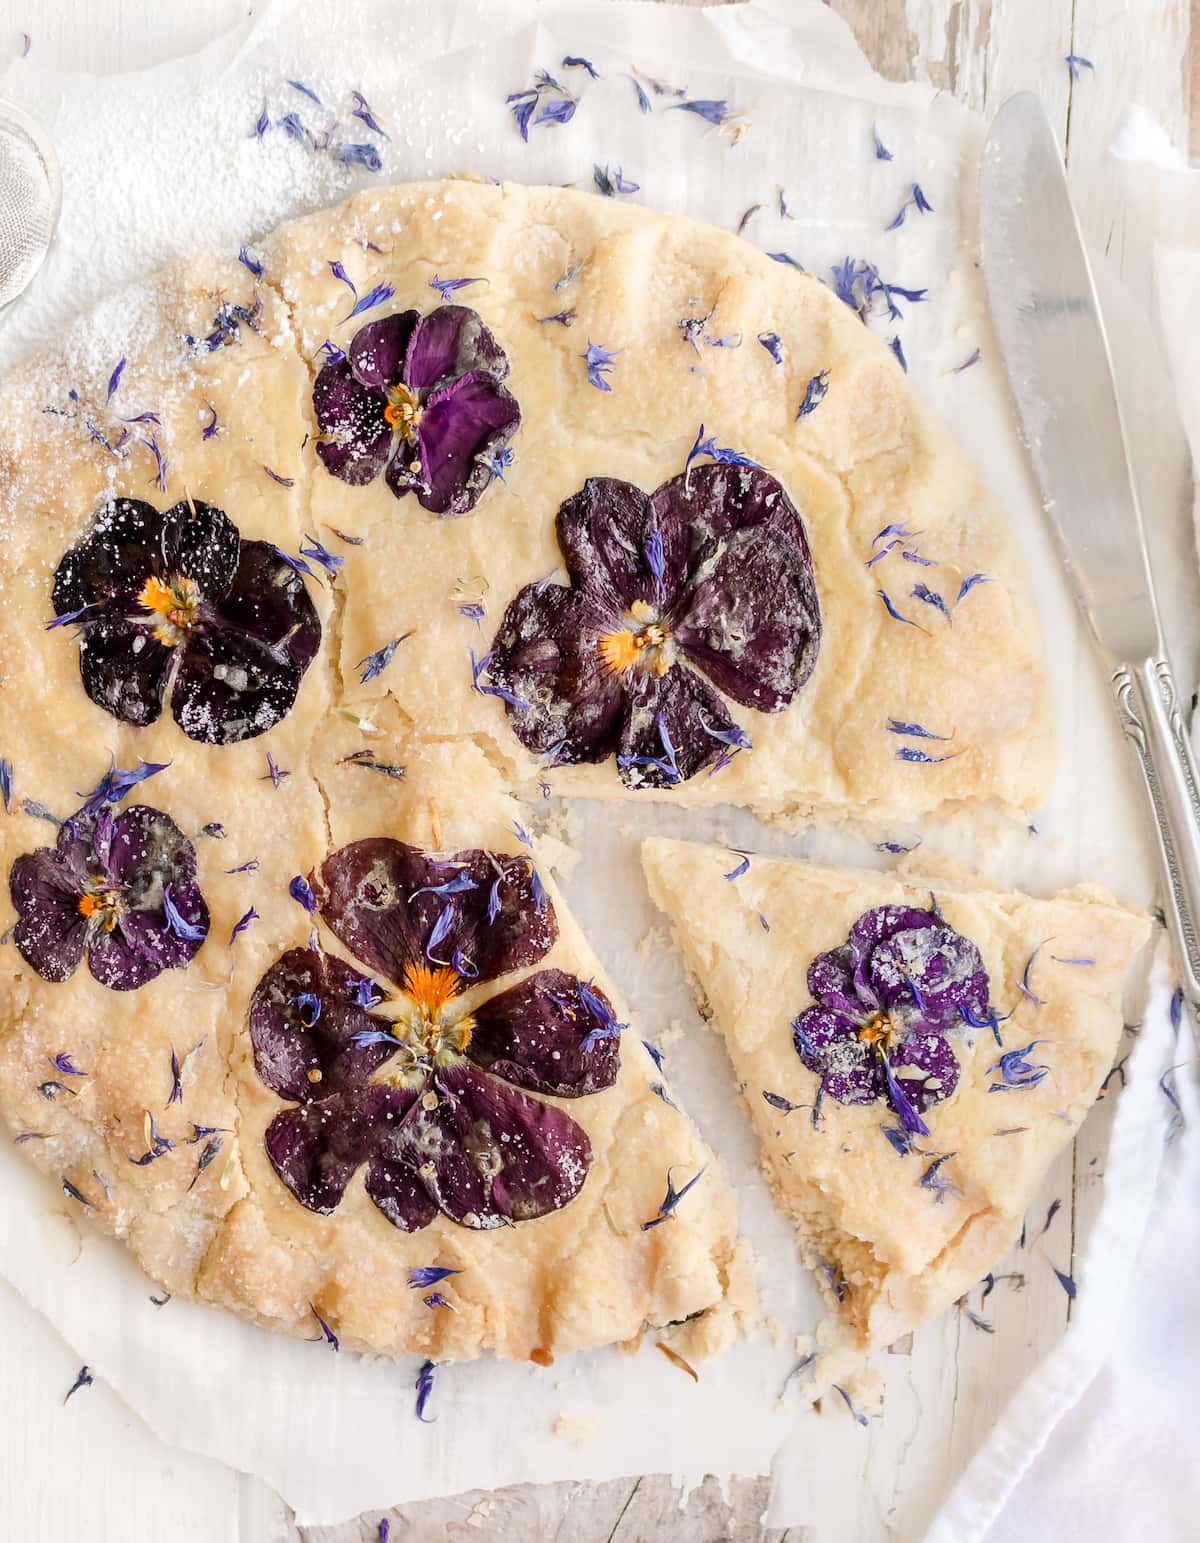 Shortbread made with edible flowers.